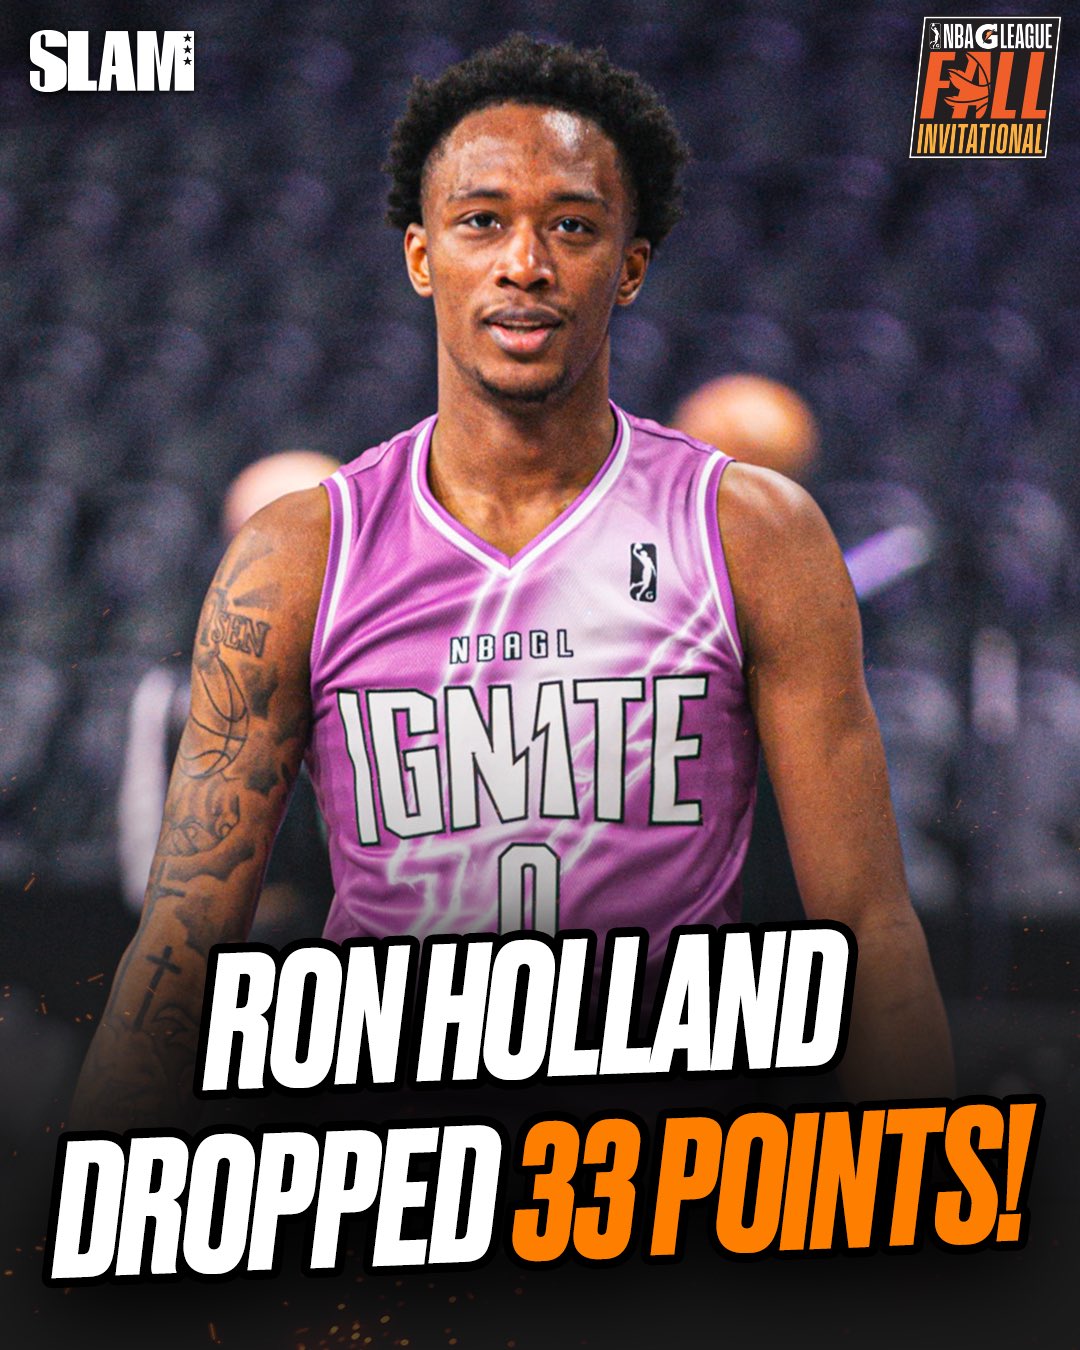 Reacting to Ron Holland's INSANE G-LEAGUE Debut 